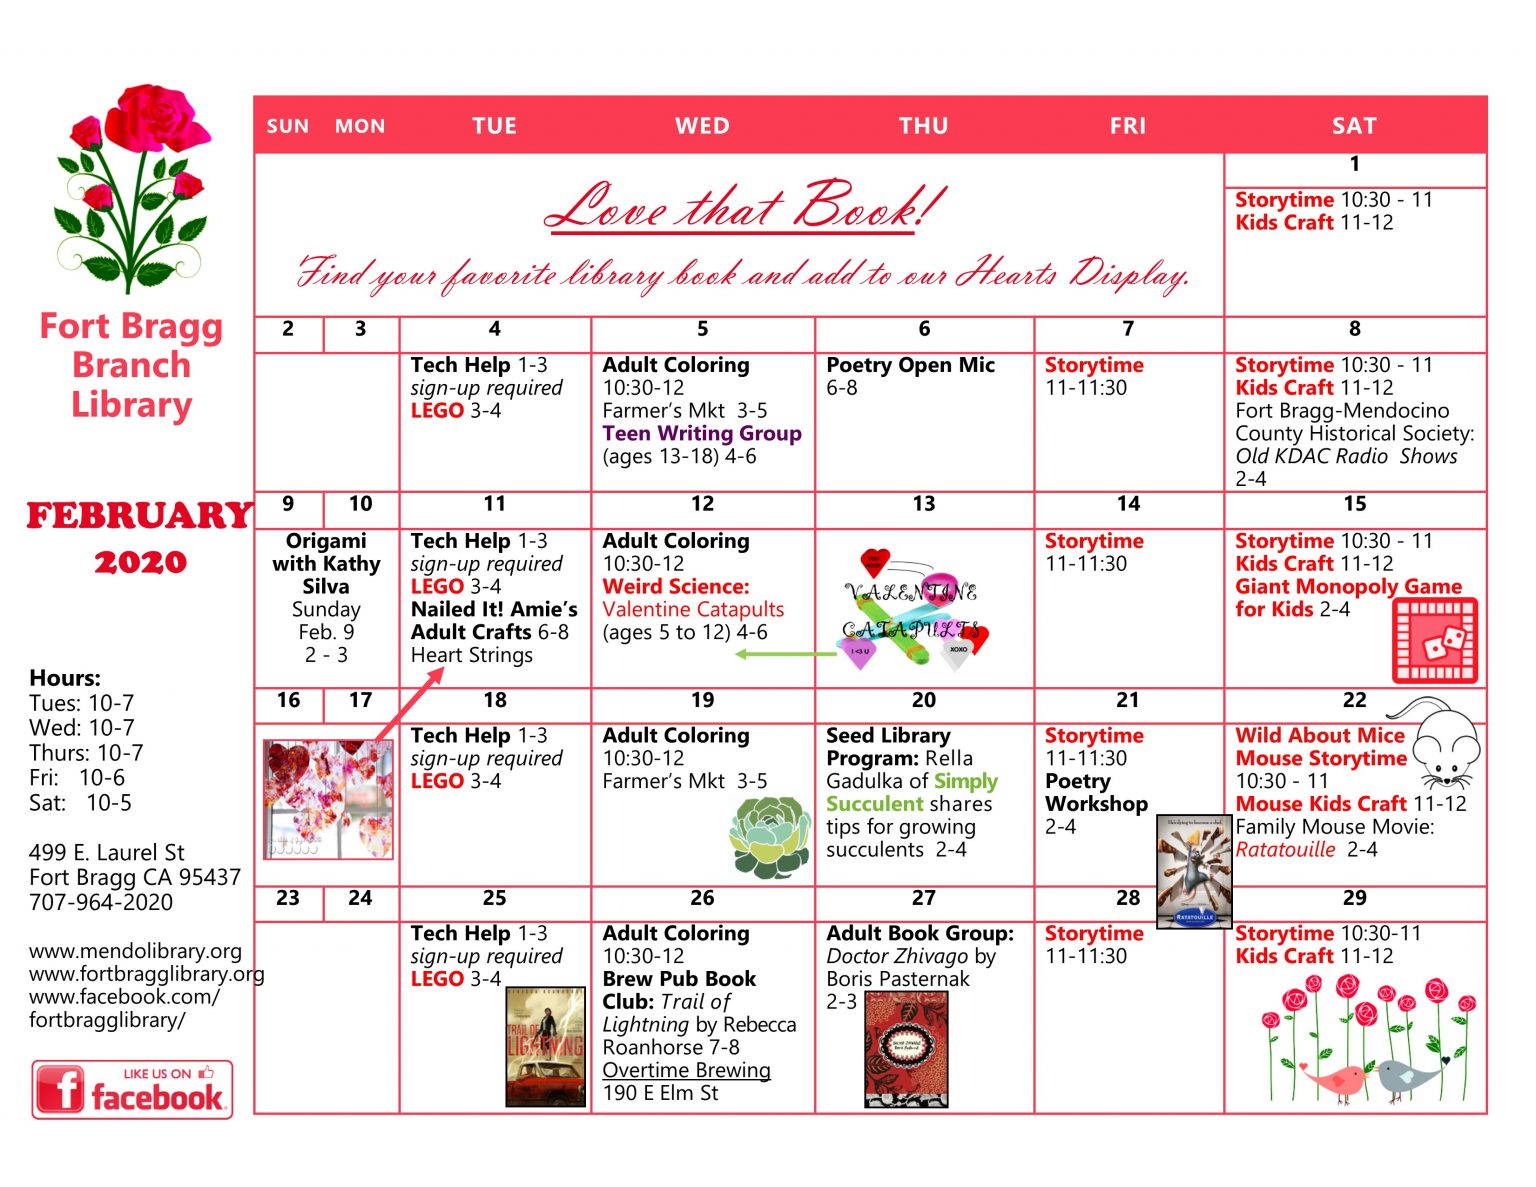 February 2020 Calendar of Events - Fort Bragg Library